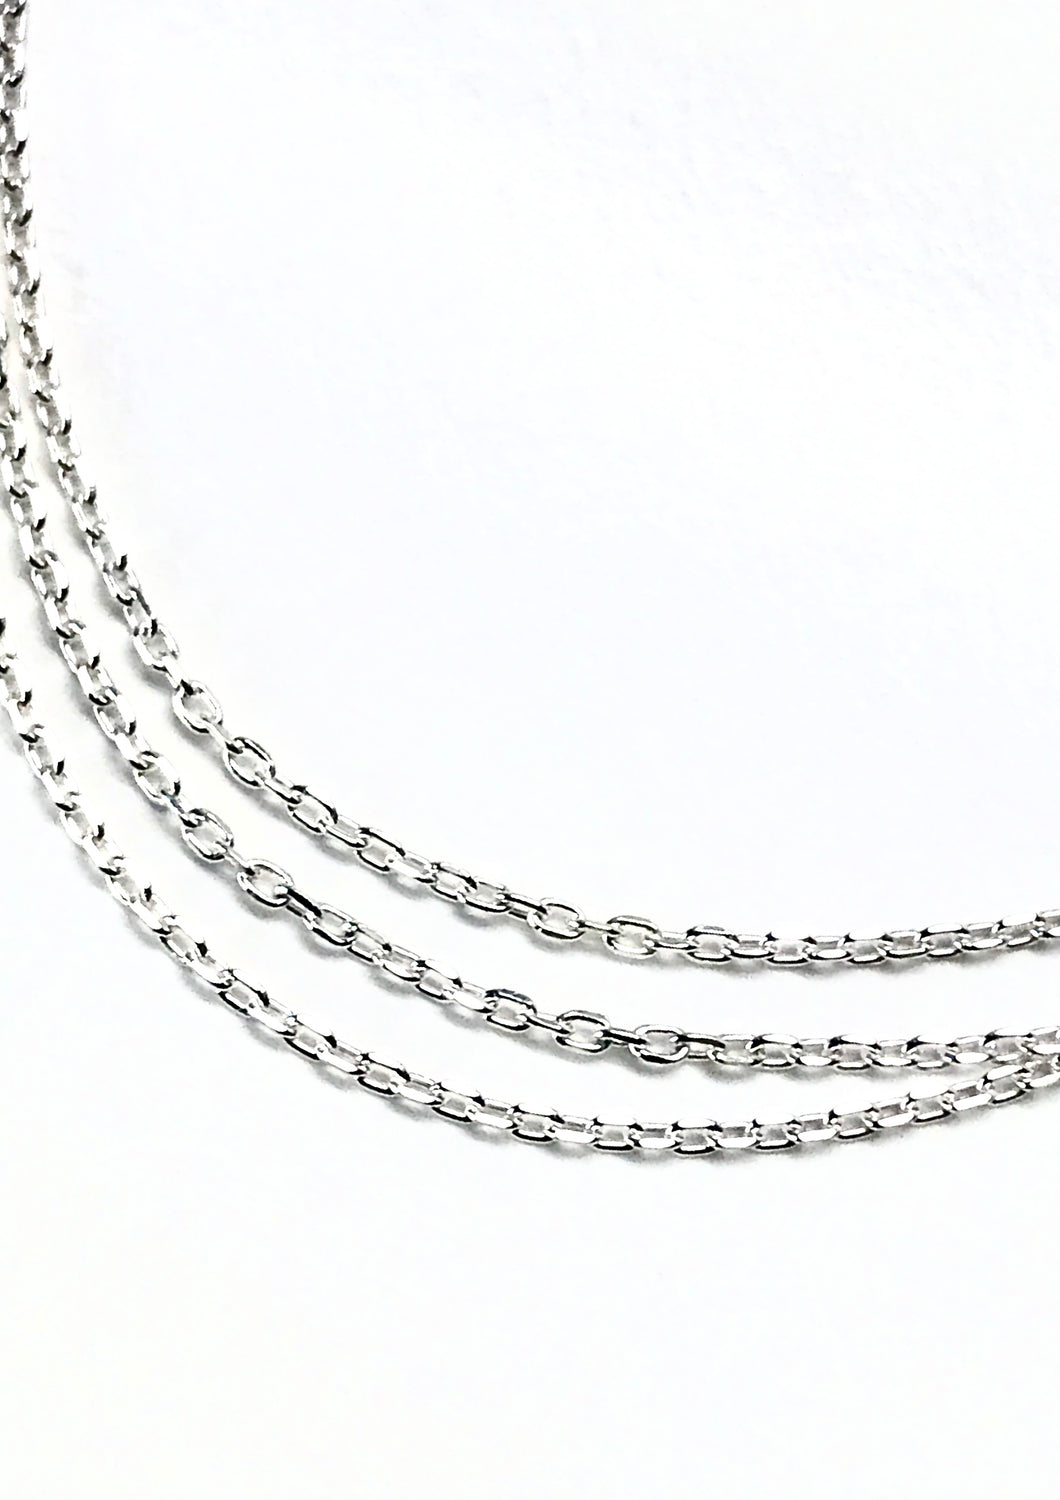 Italian 925 Sterling Silver 3 Strand Cable Chain Adjustable Necklace